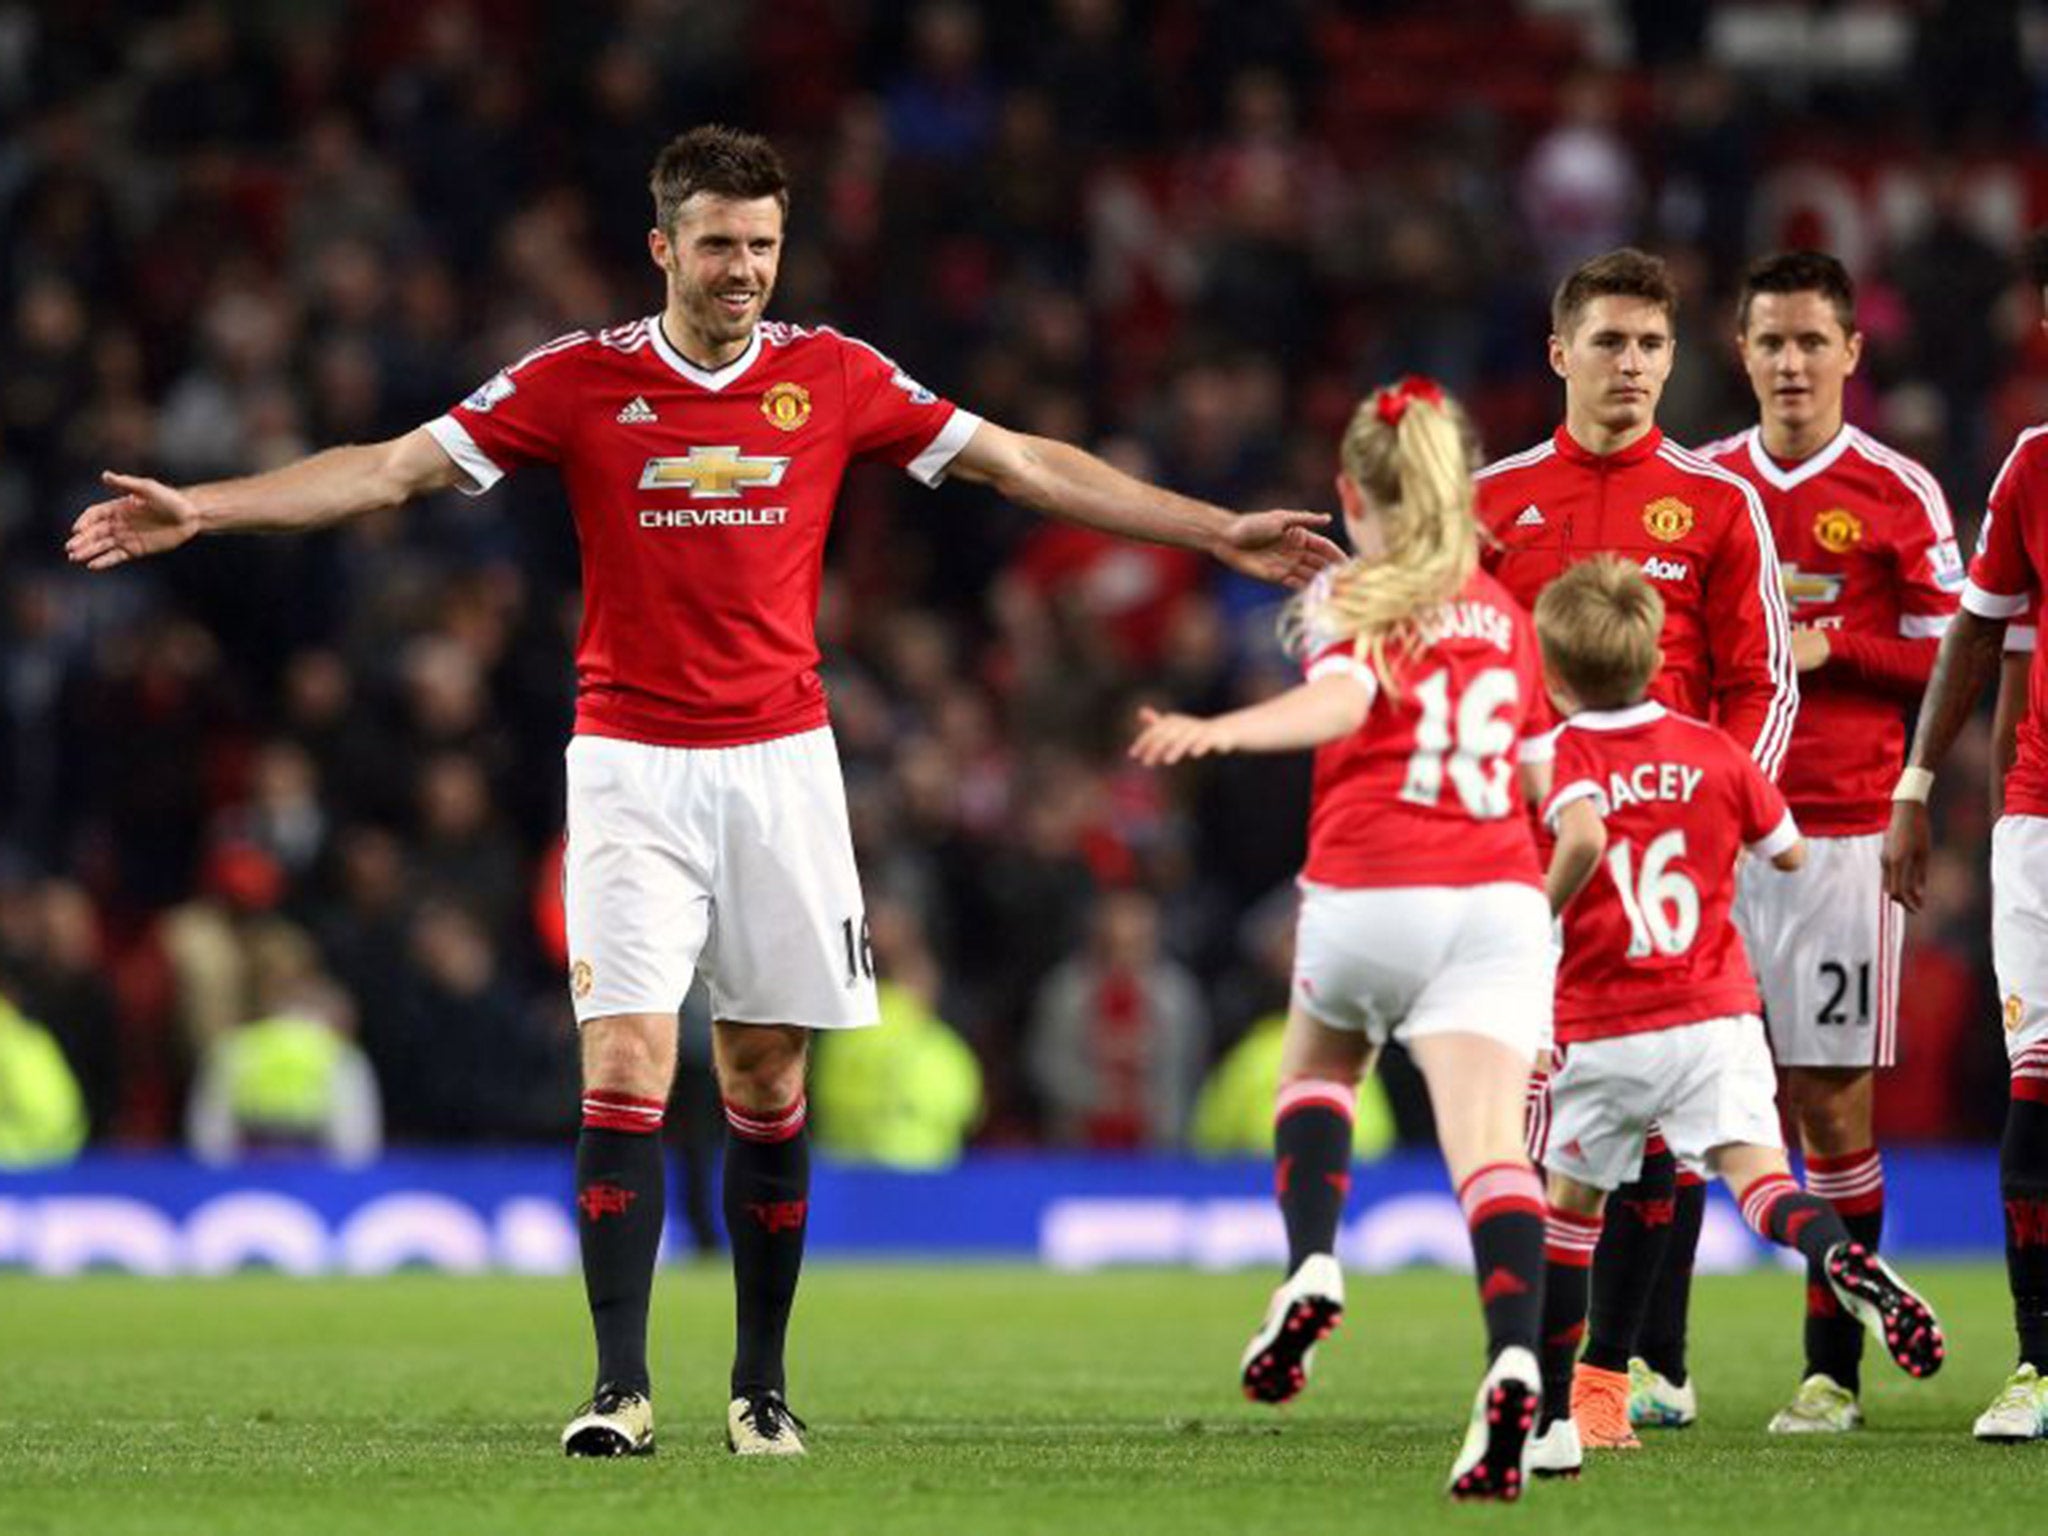 Carrick's children run onto the Old Trafford pitch to join him for the lap of honour